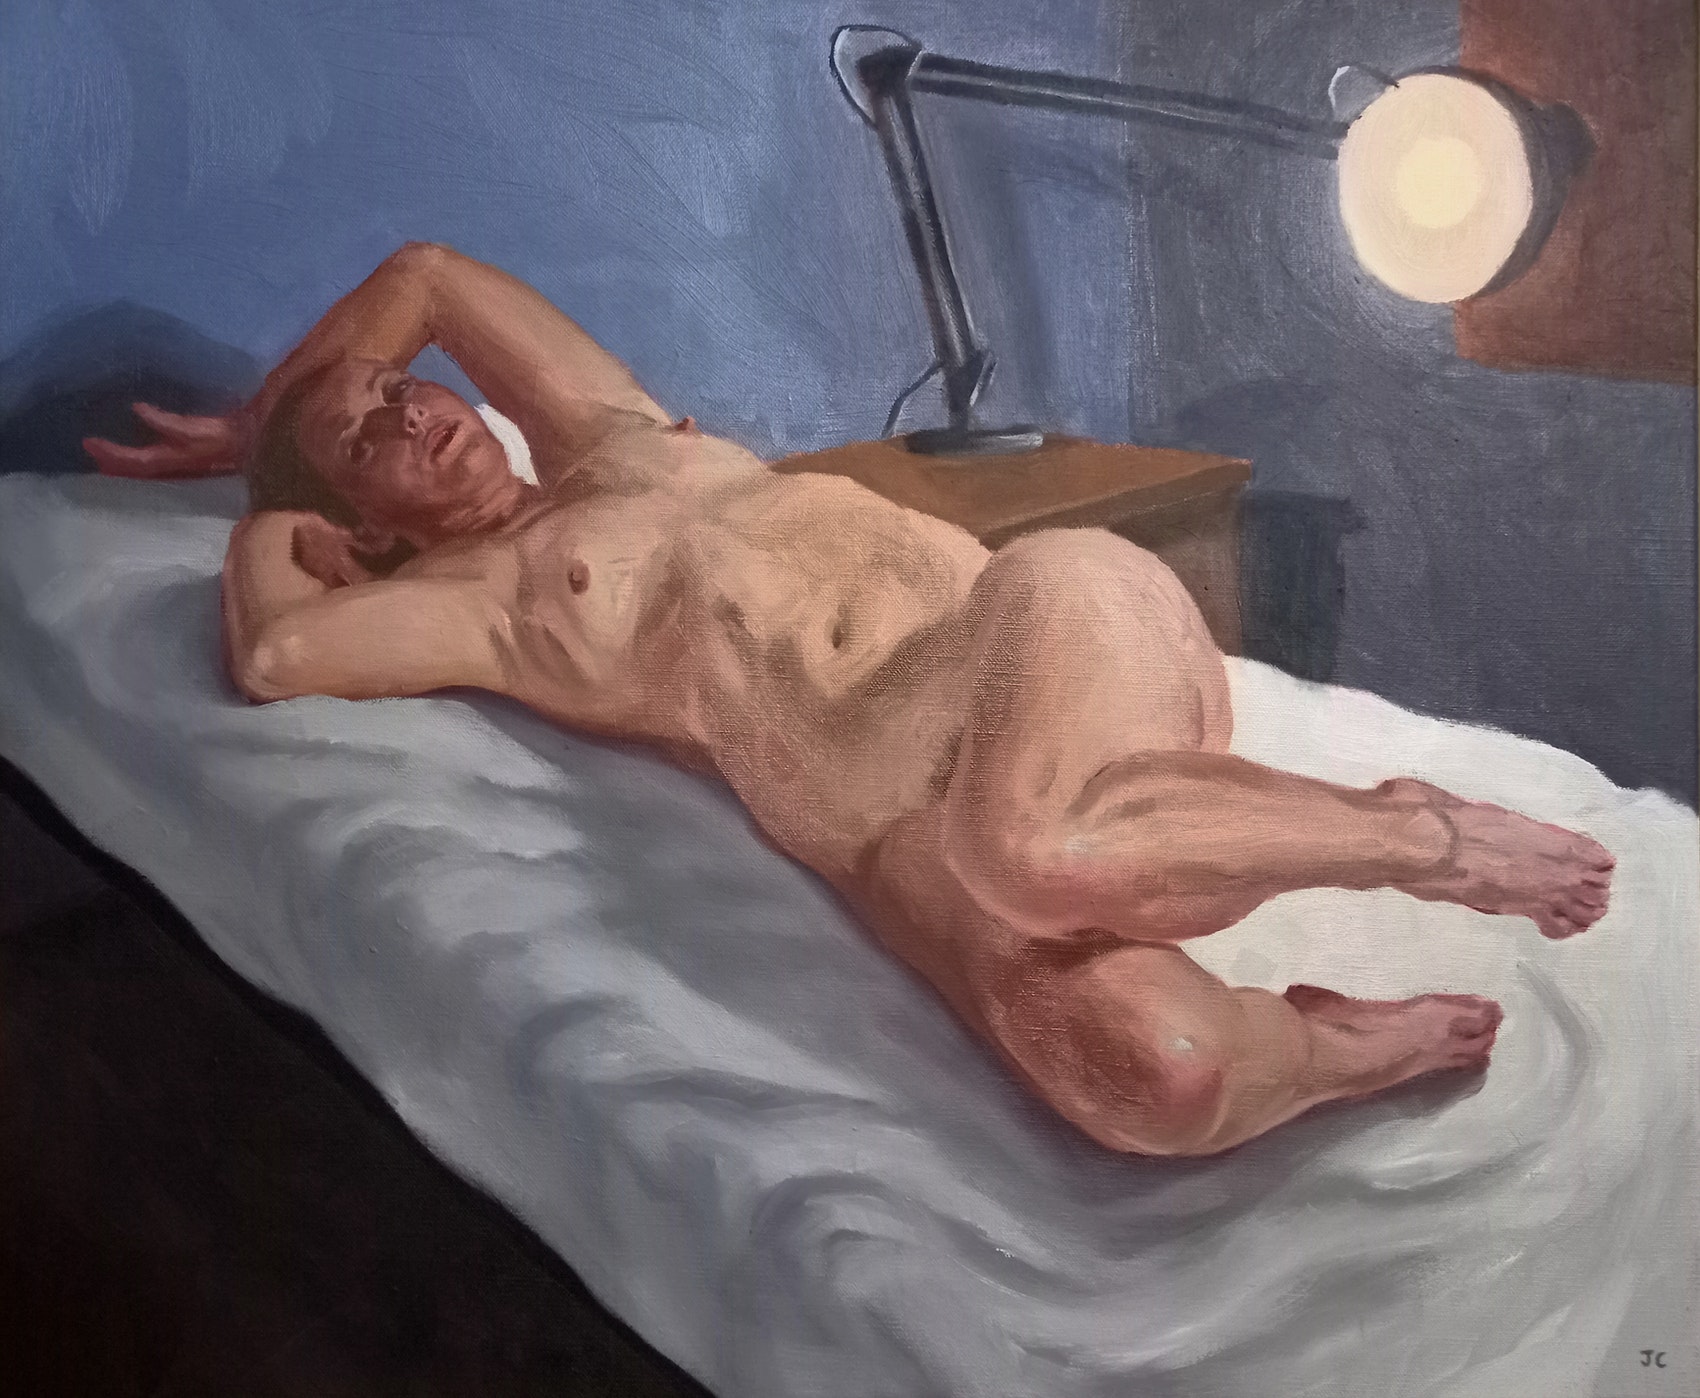 'Woman on a Bed' (oil) by Jemma Cakebread. A nude oil painting art work of a woman lying on a bed with white sheets and a lamp shining on her.